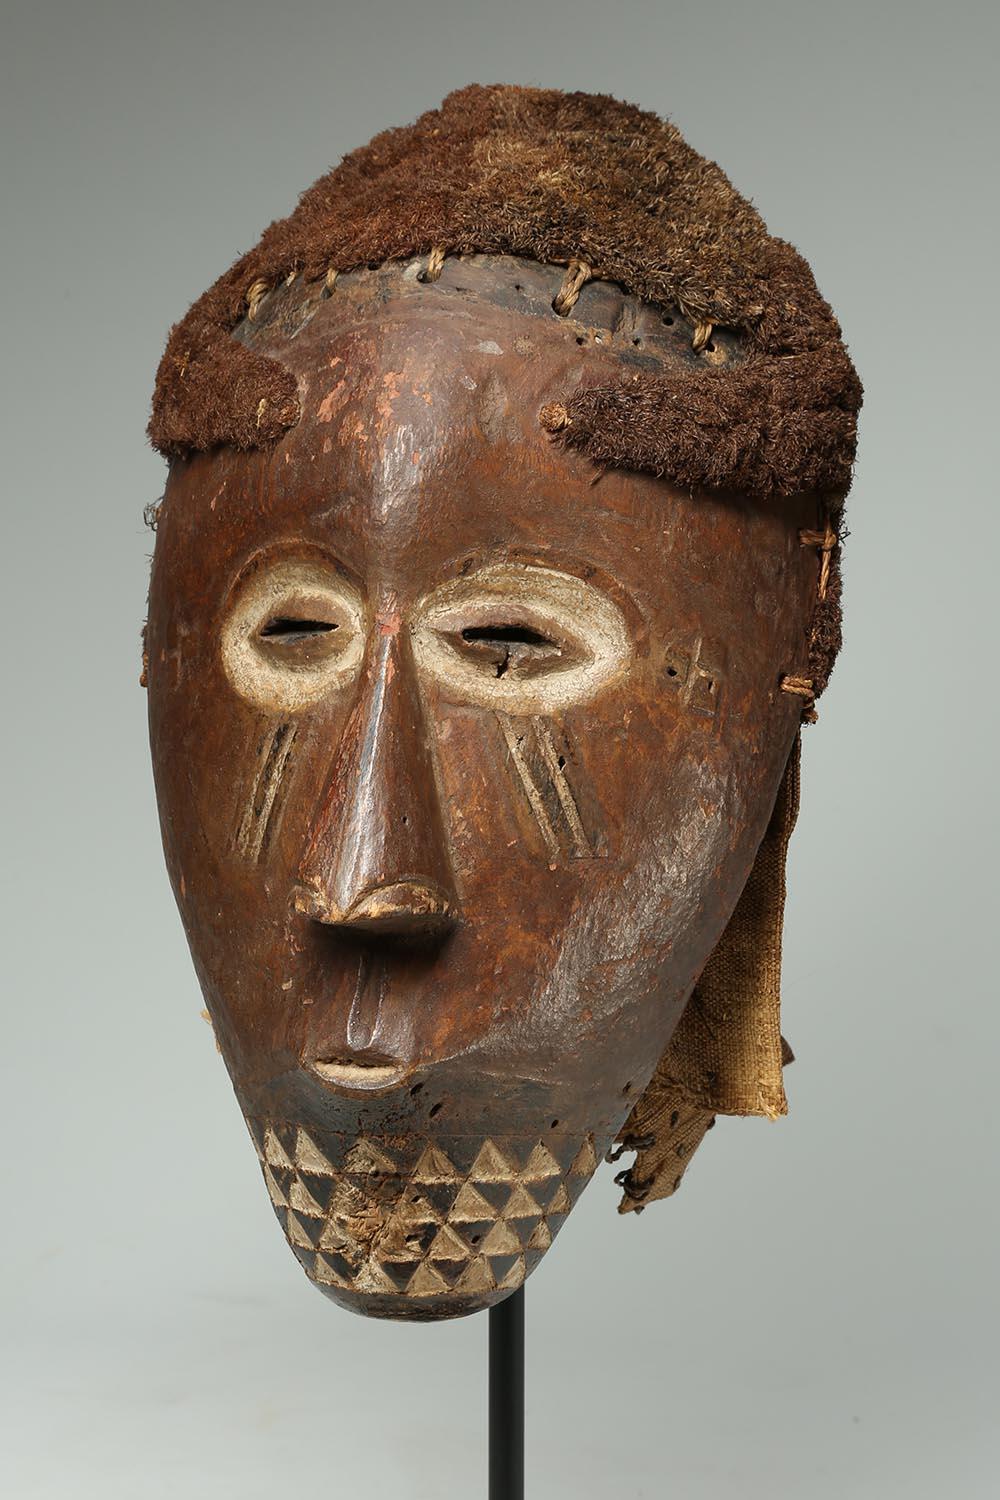 Early Kuba wood mask with traces of white and red pigments, geometric design on chin. Parts of raffia and cloth headdress attached. Woven raffia to simulate hair, early 20th century. On custom metal stand. Mask 13 x 7 x 8 inches. Old inventory label